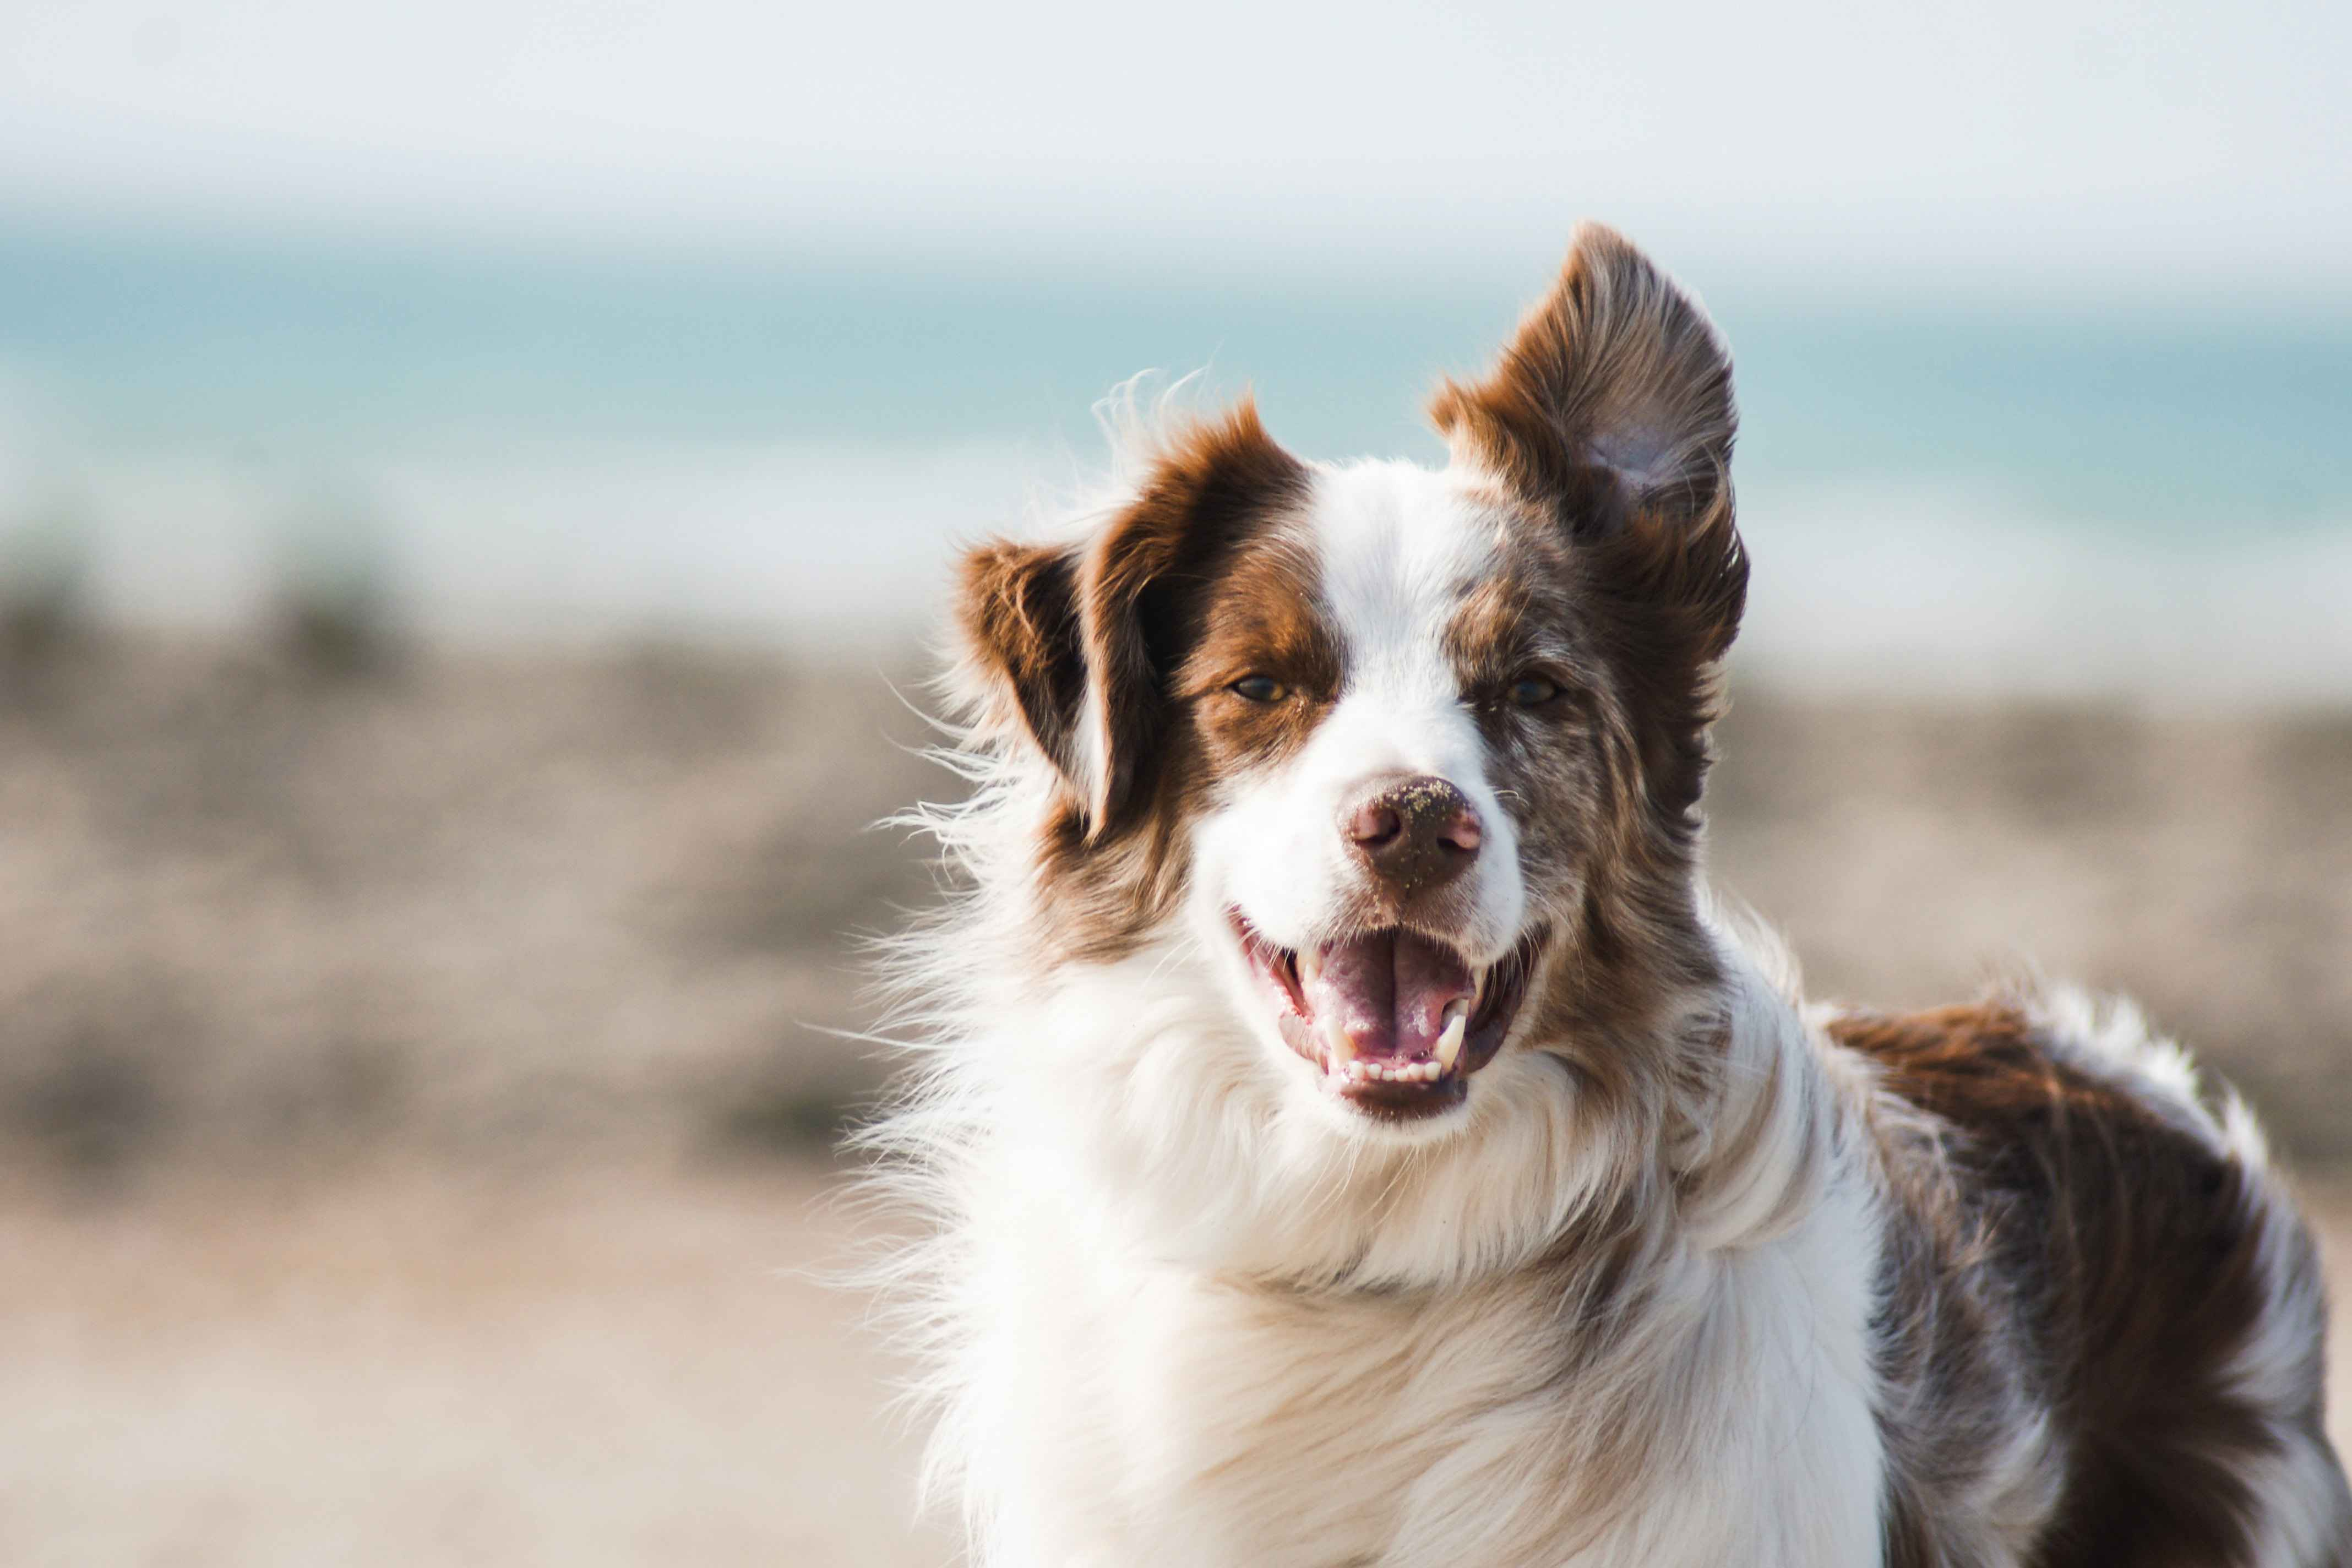 Border Collie Training: Tips for Introducing a New Roommate to Your Furry Friend